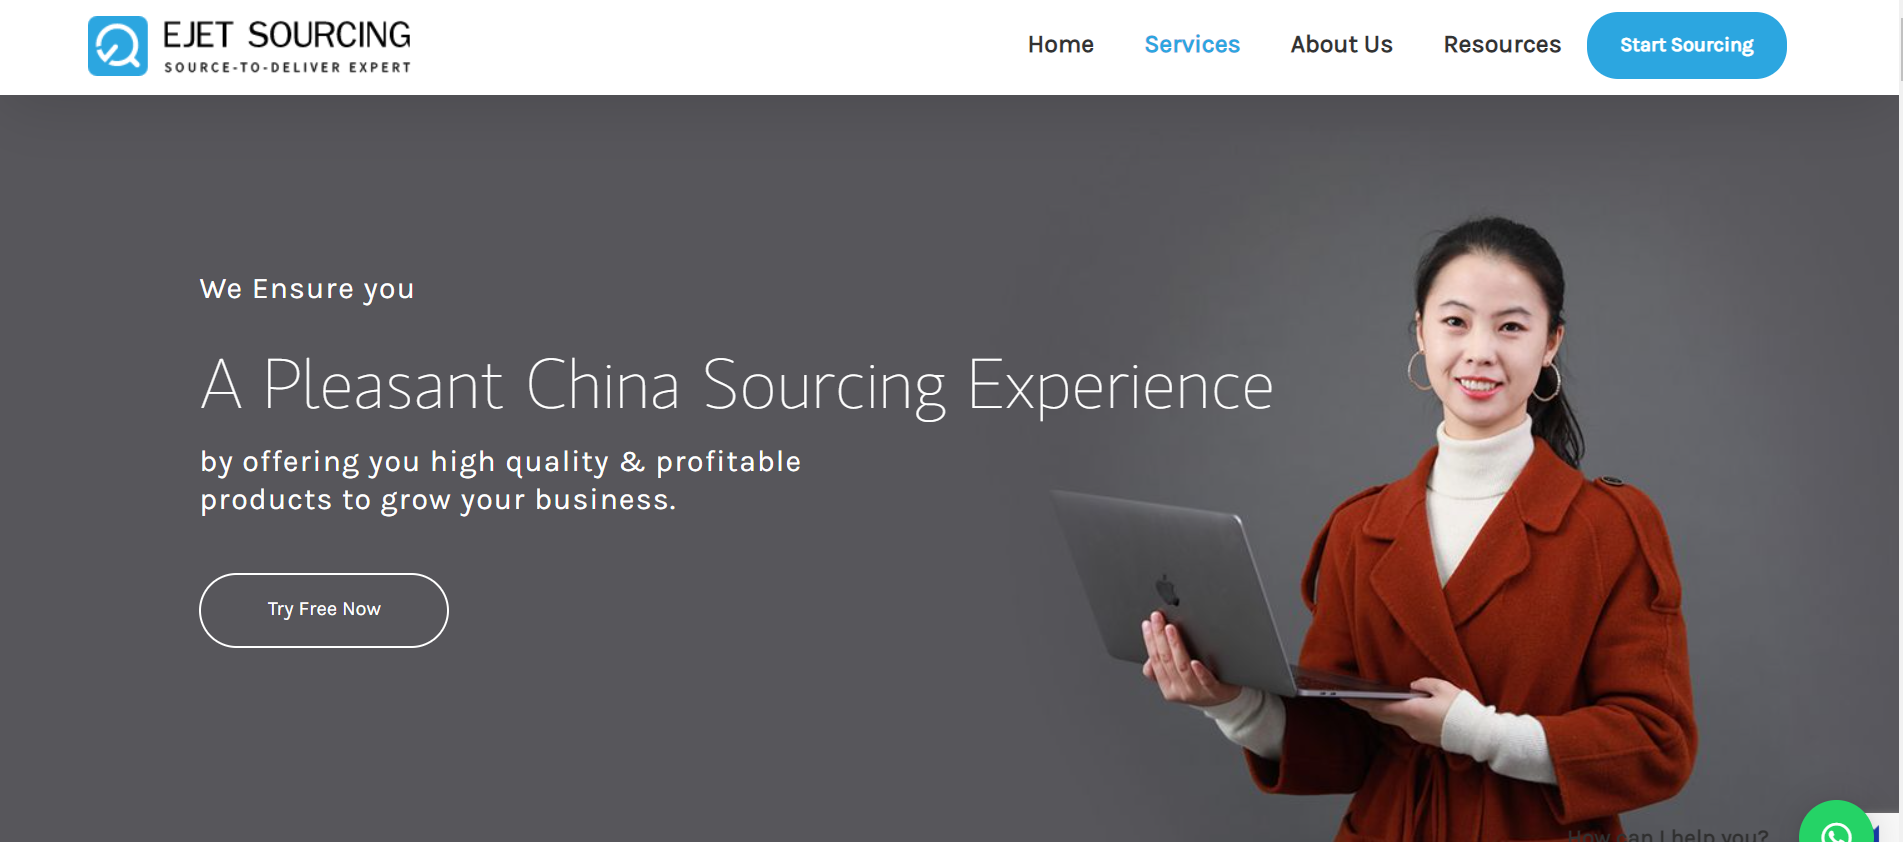 china sourcing agent